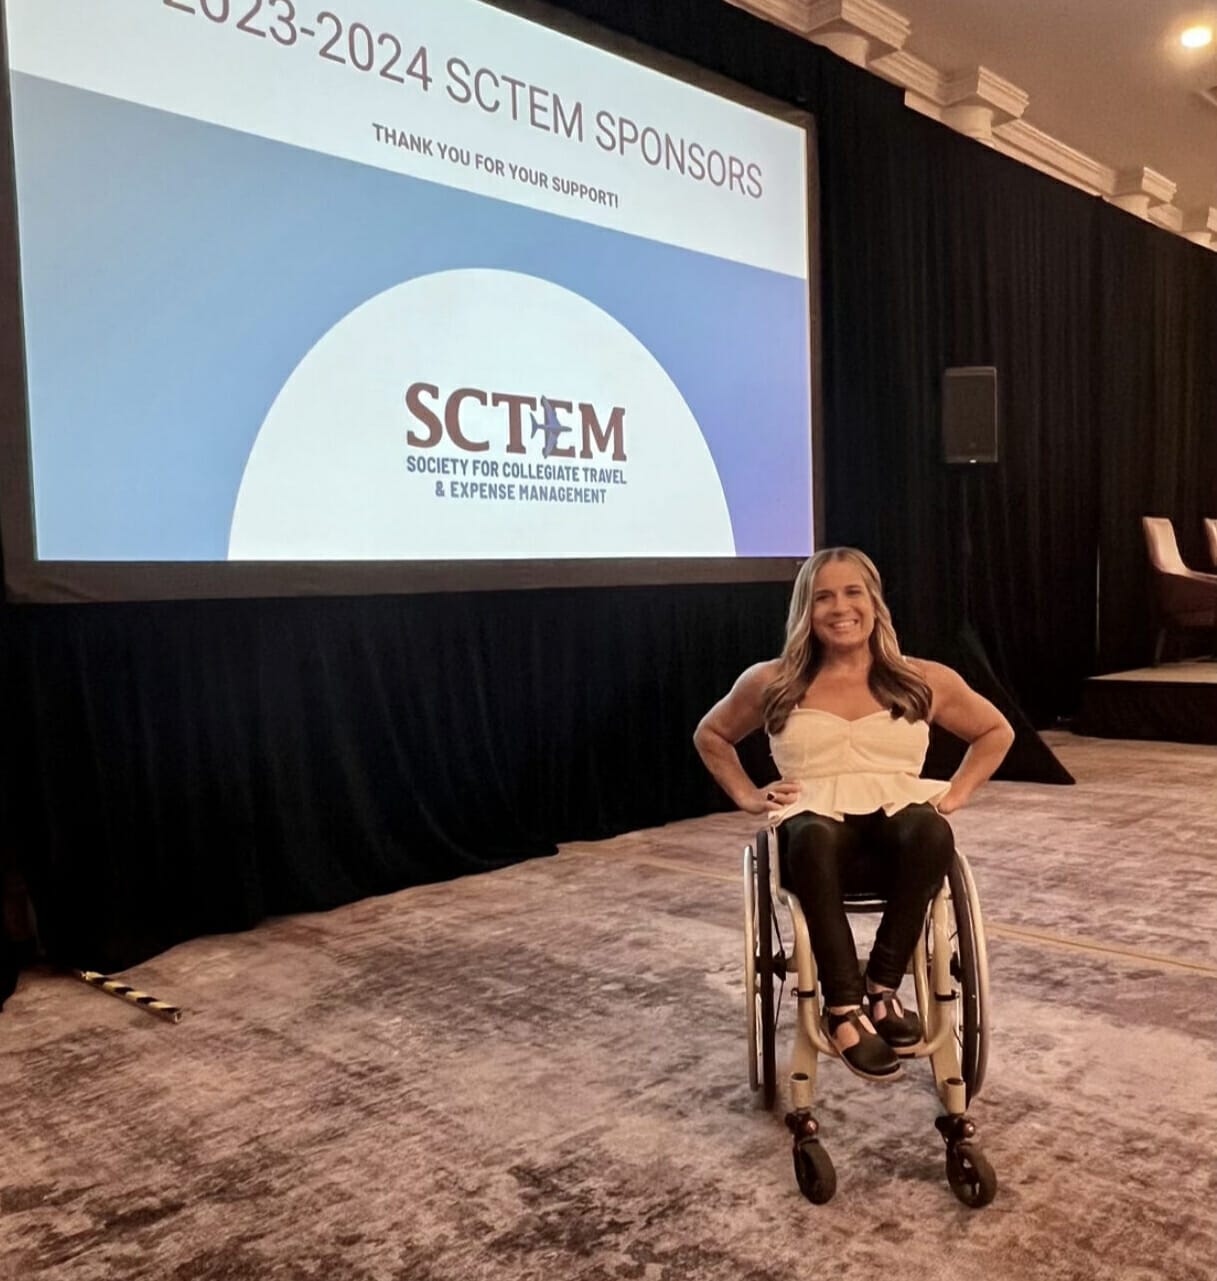 Alycia in front of SCTEM logo getting ready to go on stage for keynote.